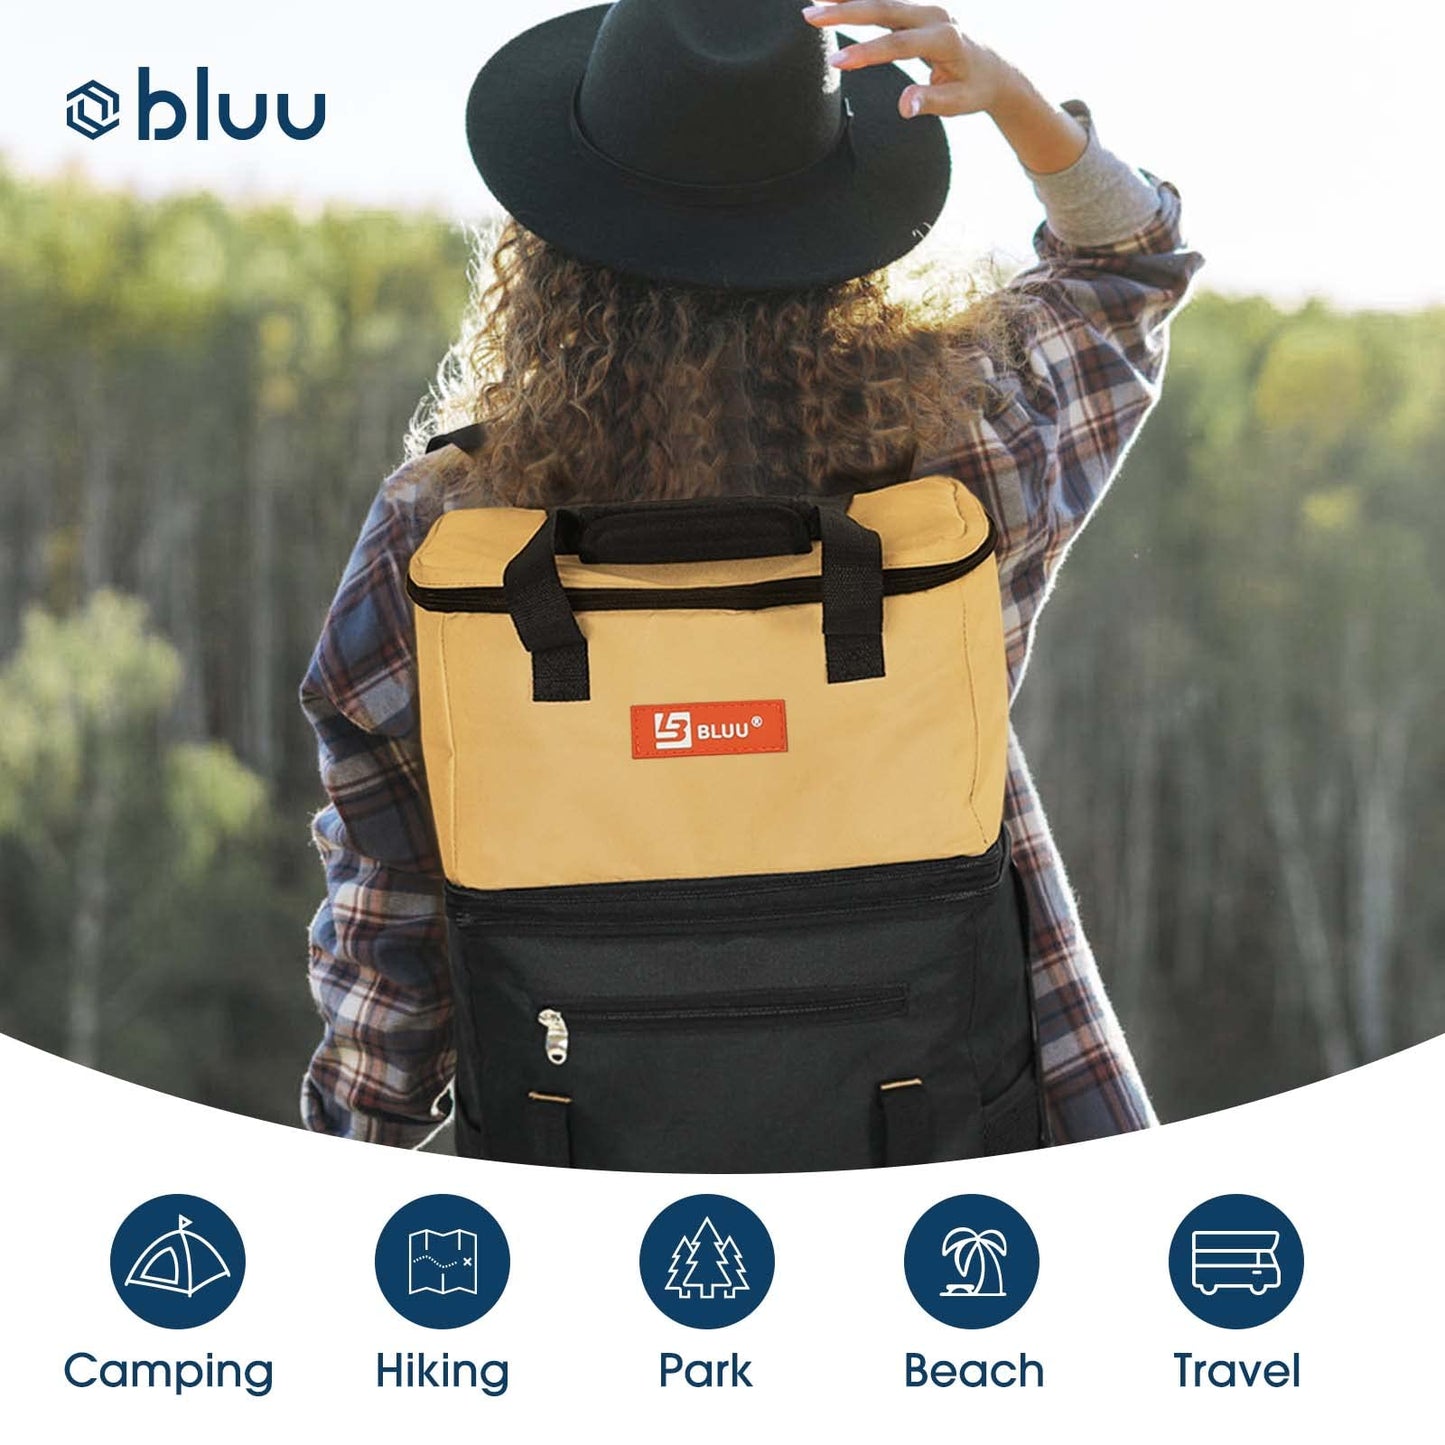 BLUU 2-in-1 Patent Innovation 60 Cans Backpack Cooler & Cooler Bag ,Waterproof & Leakproof Insulated Cooler Backpack Double Decker Large Lunch for Men Women,Soft Coolers for Camping, Beach, Picnic